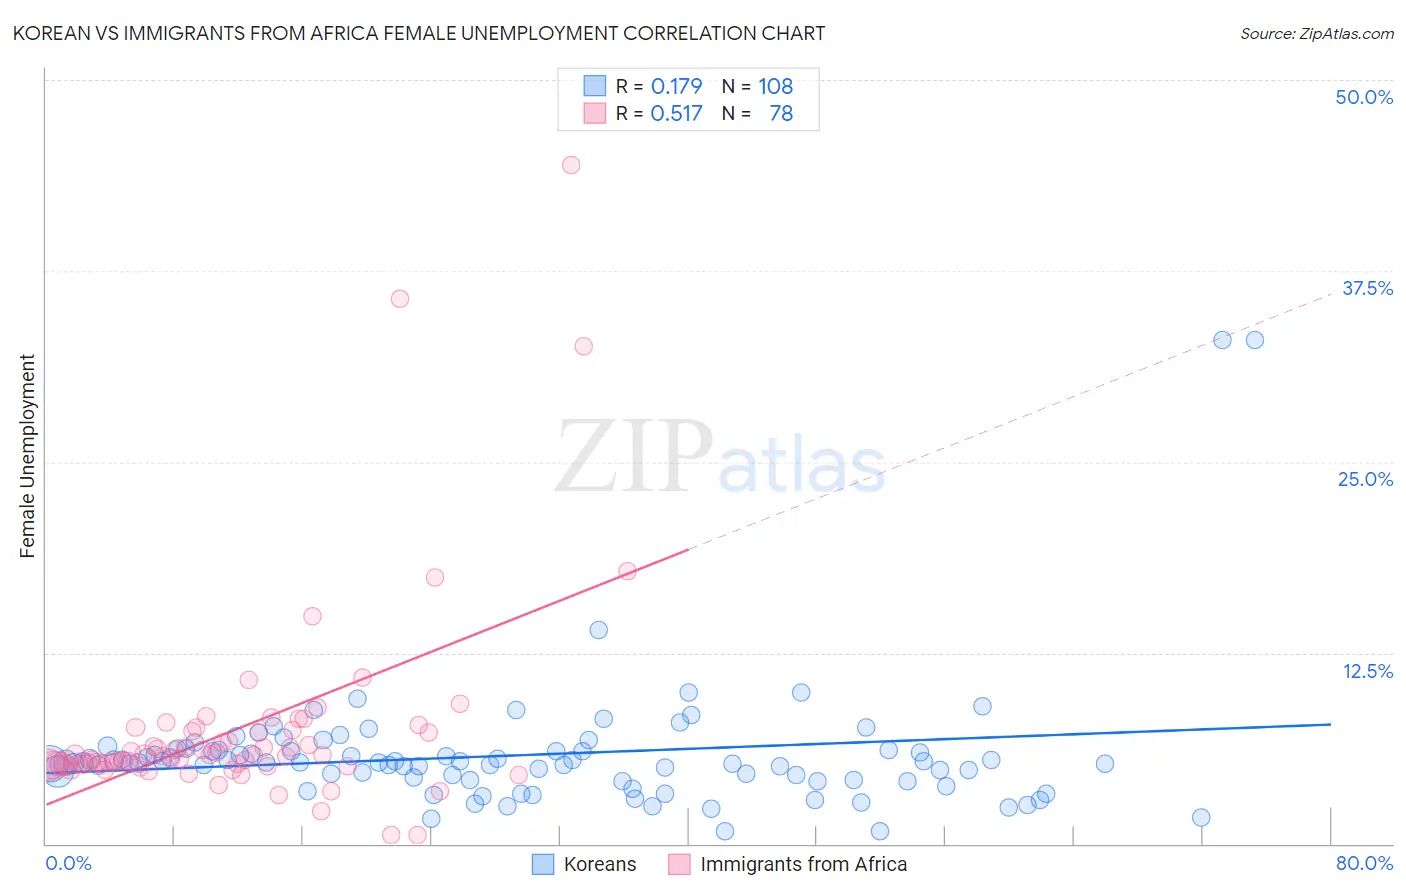 Korean vs Immigrants from Africa Female Unemployment